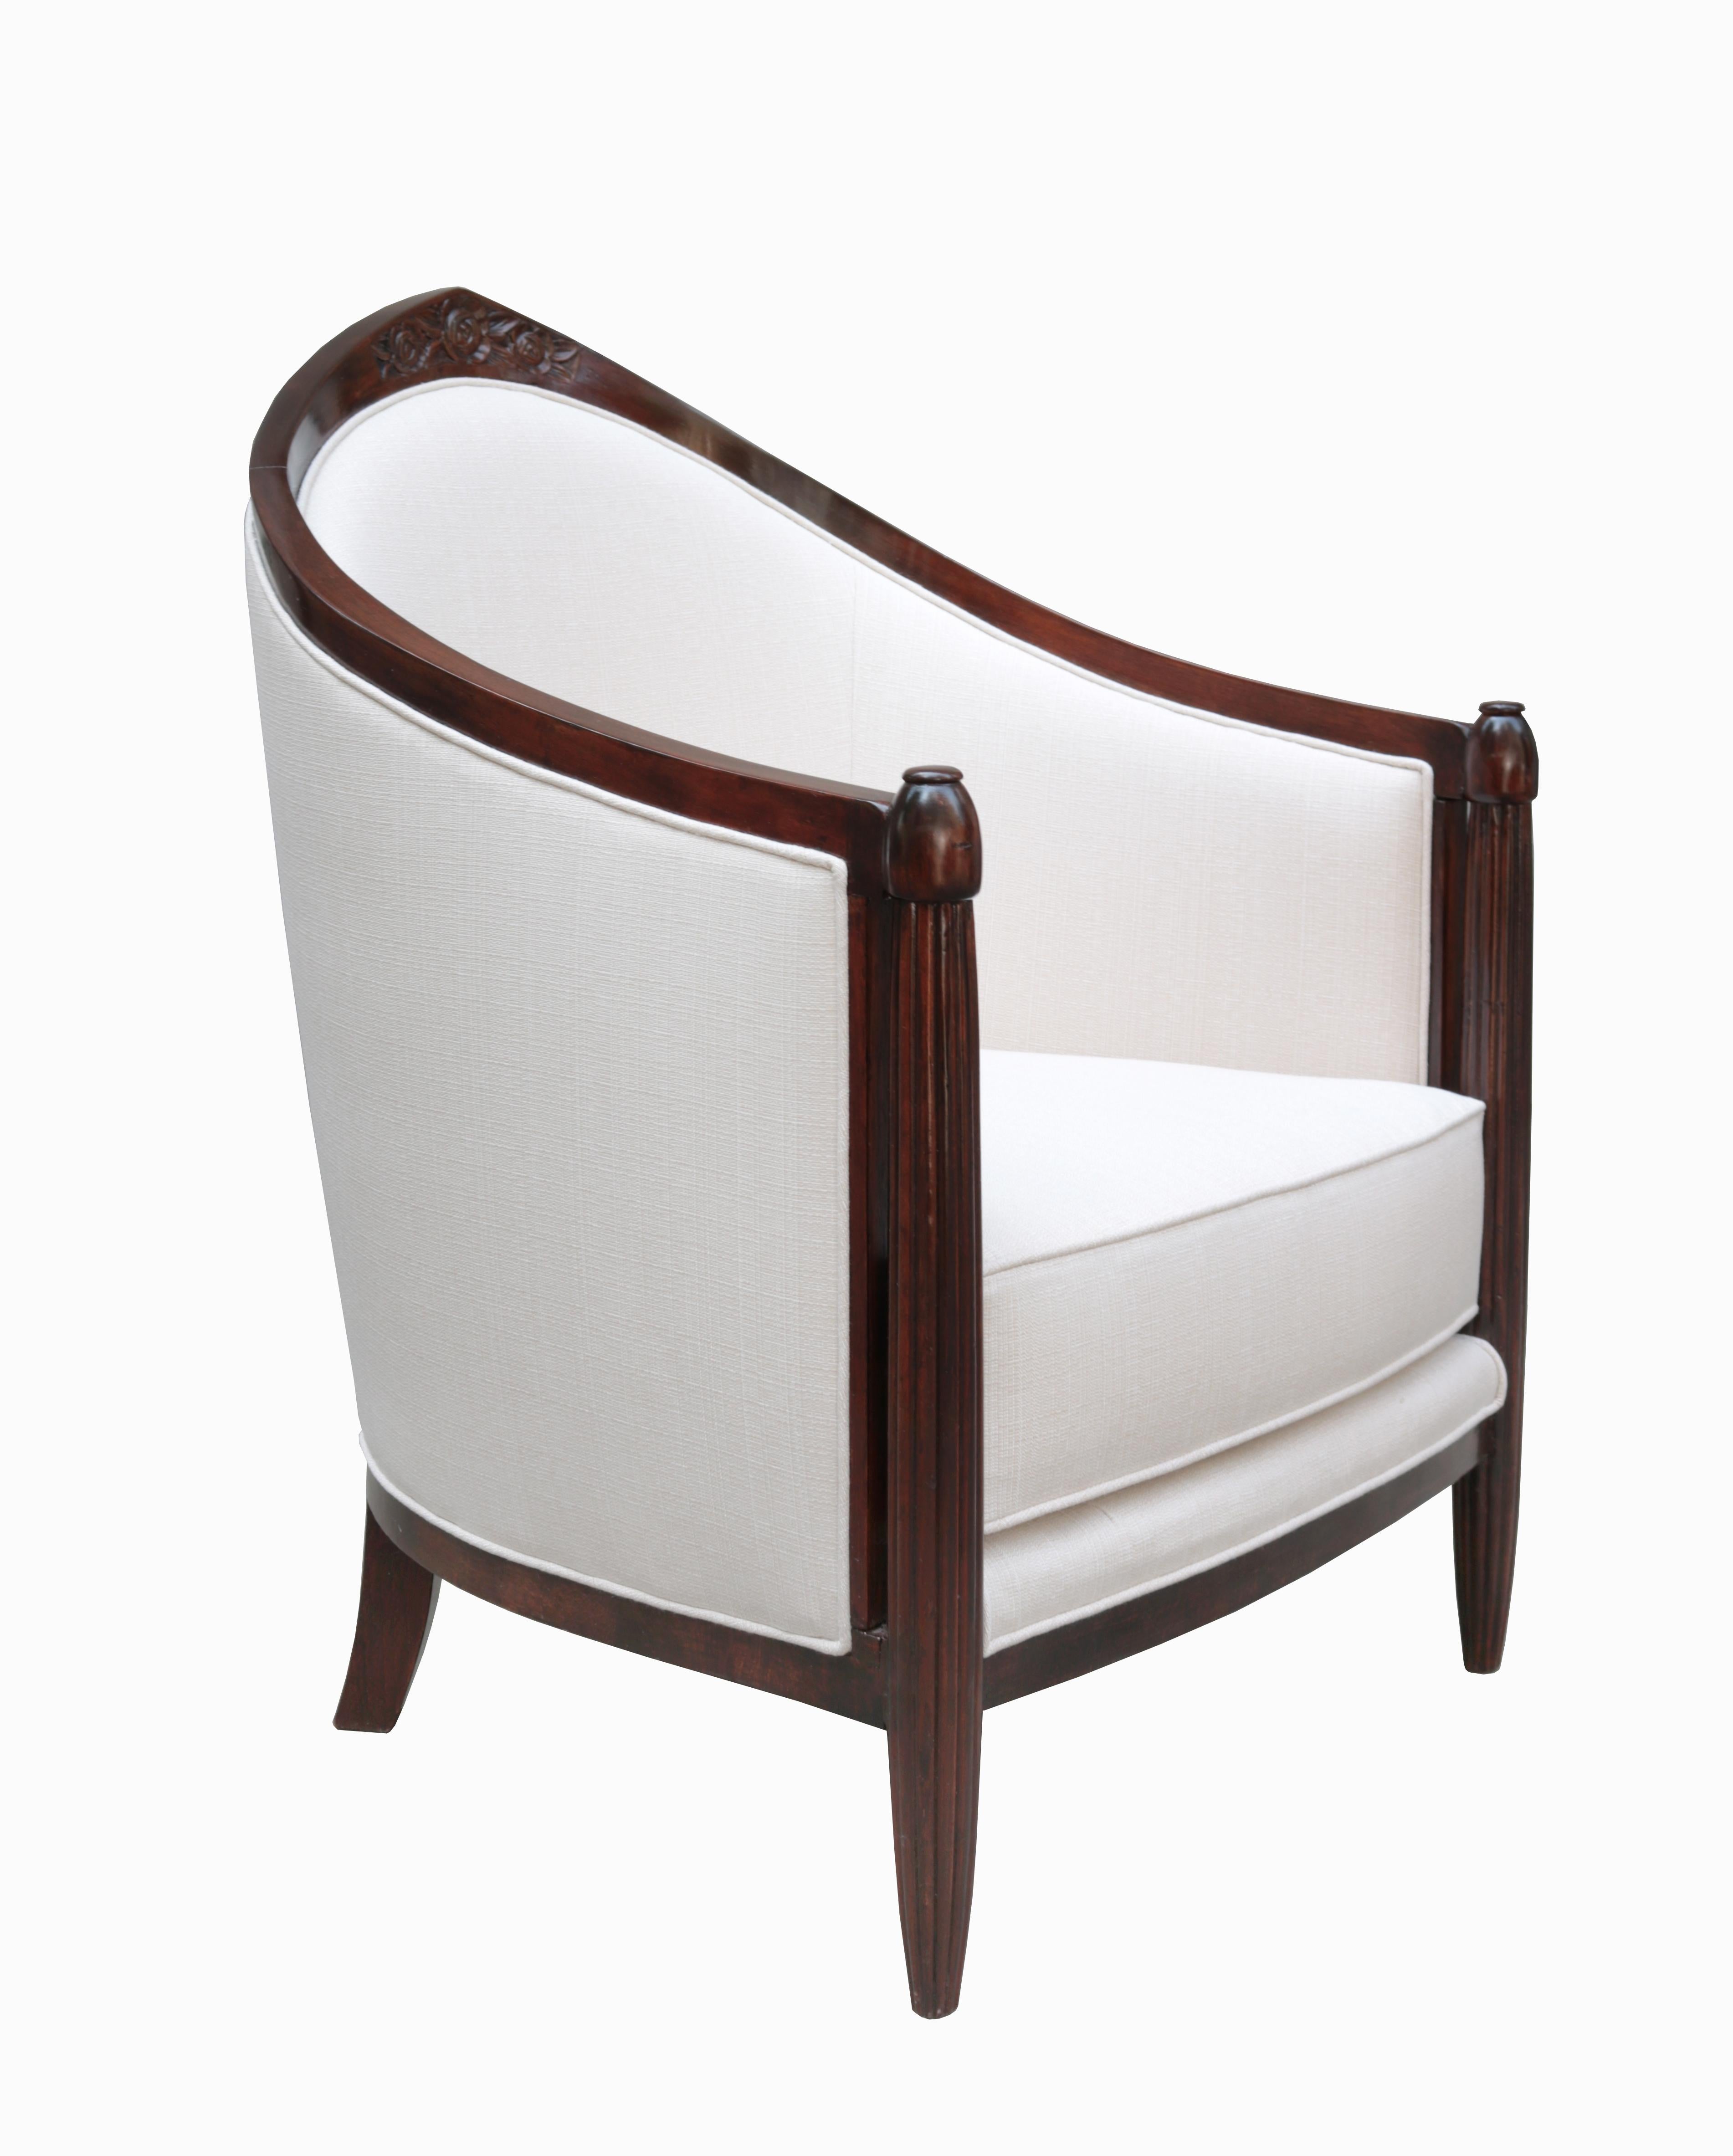 A pair of Art Deco bergères.
Stanied wood frames with carved details
on the central backrest of the frame.